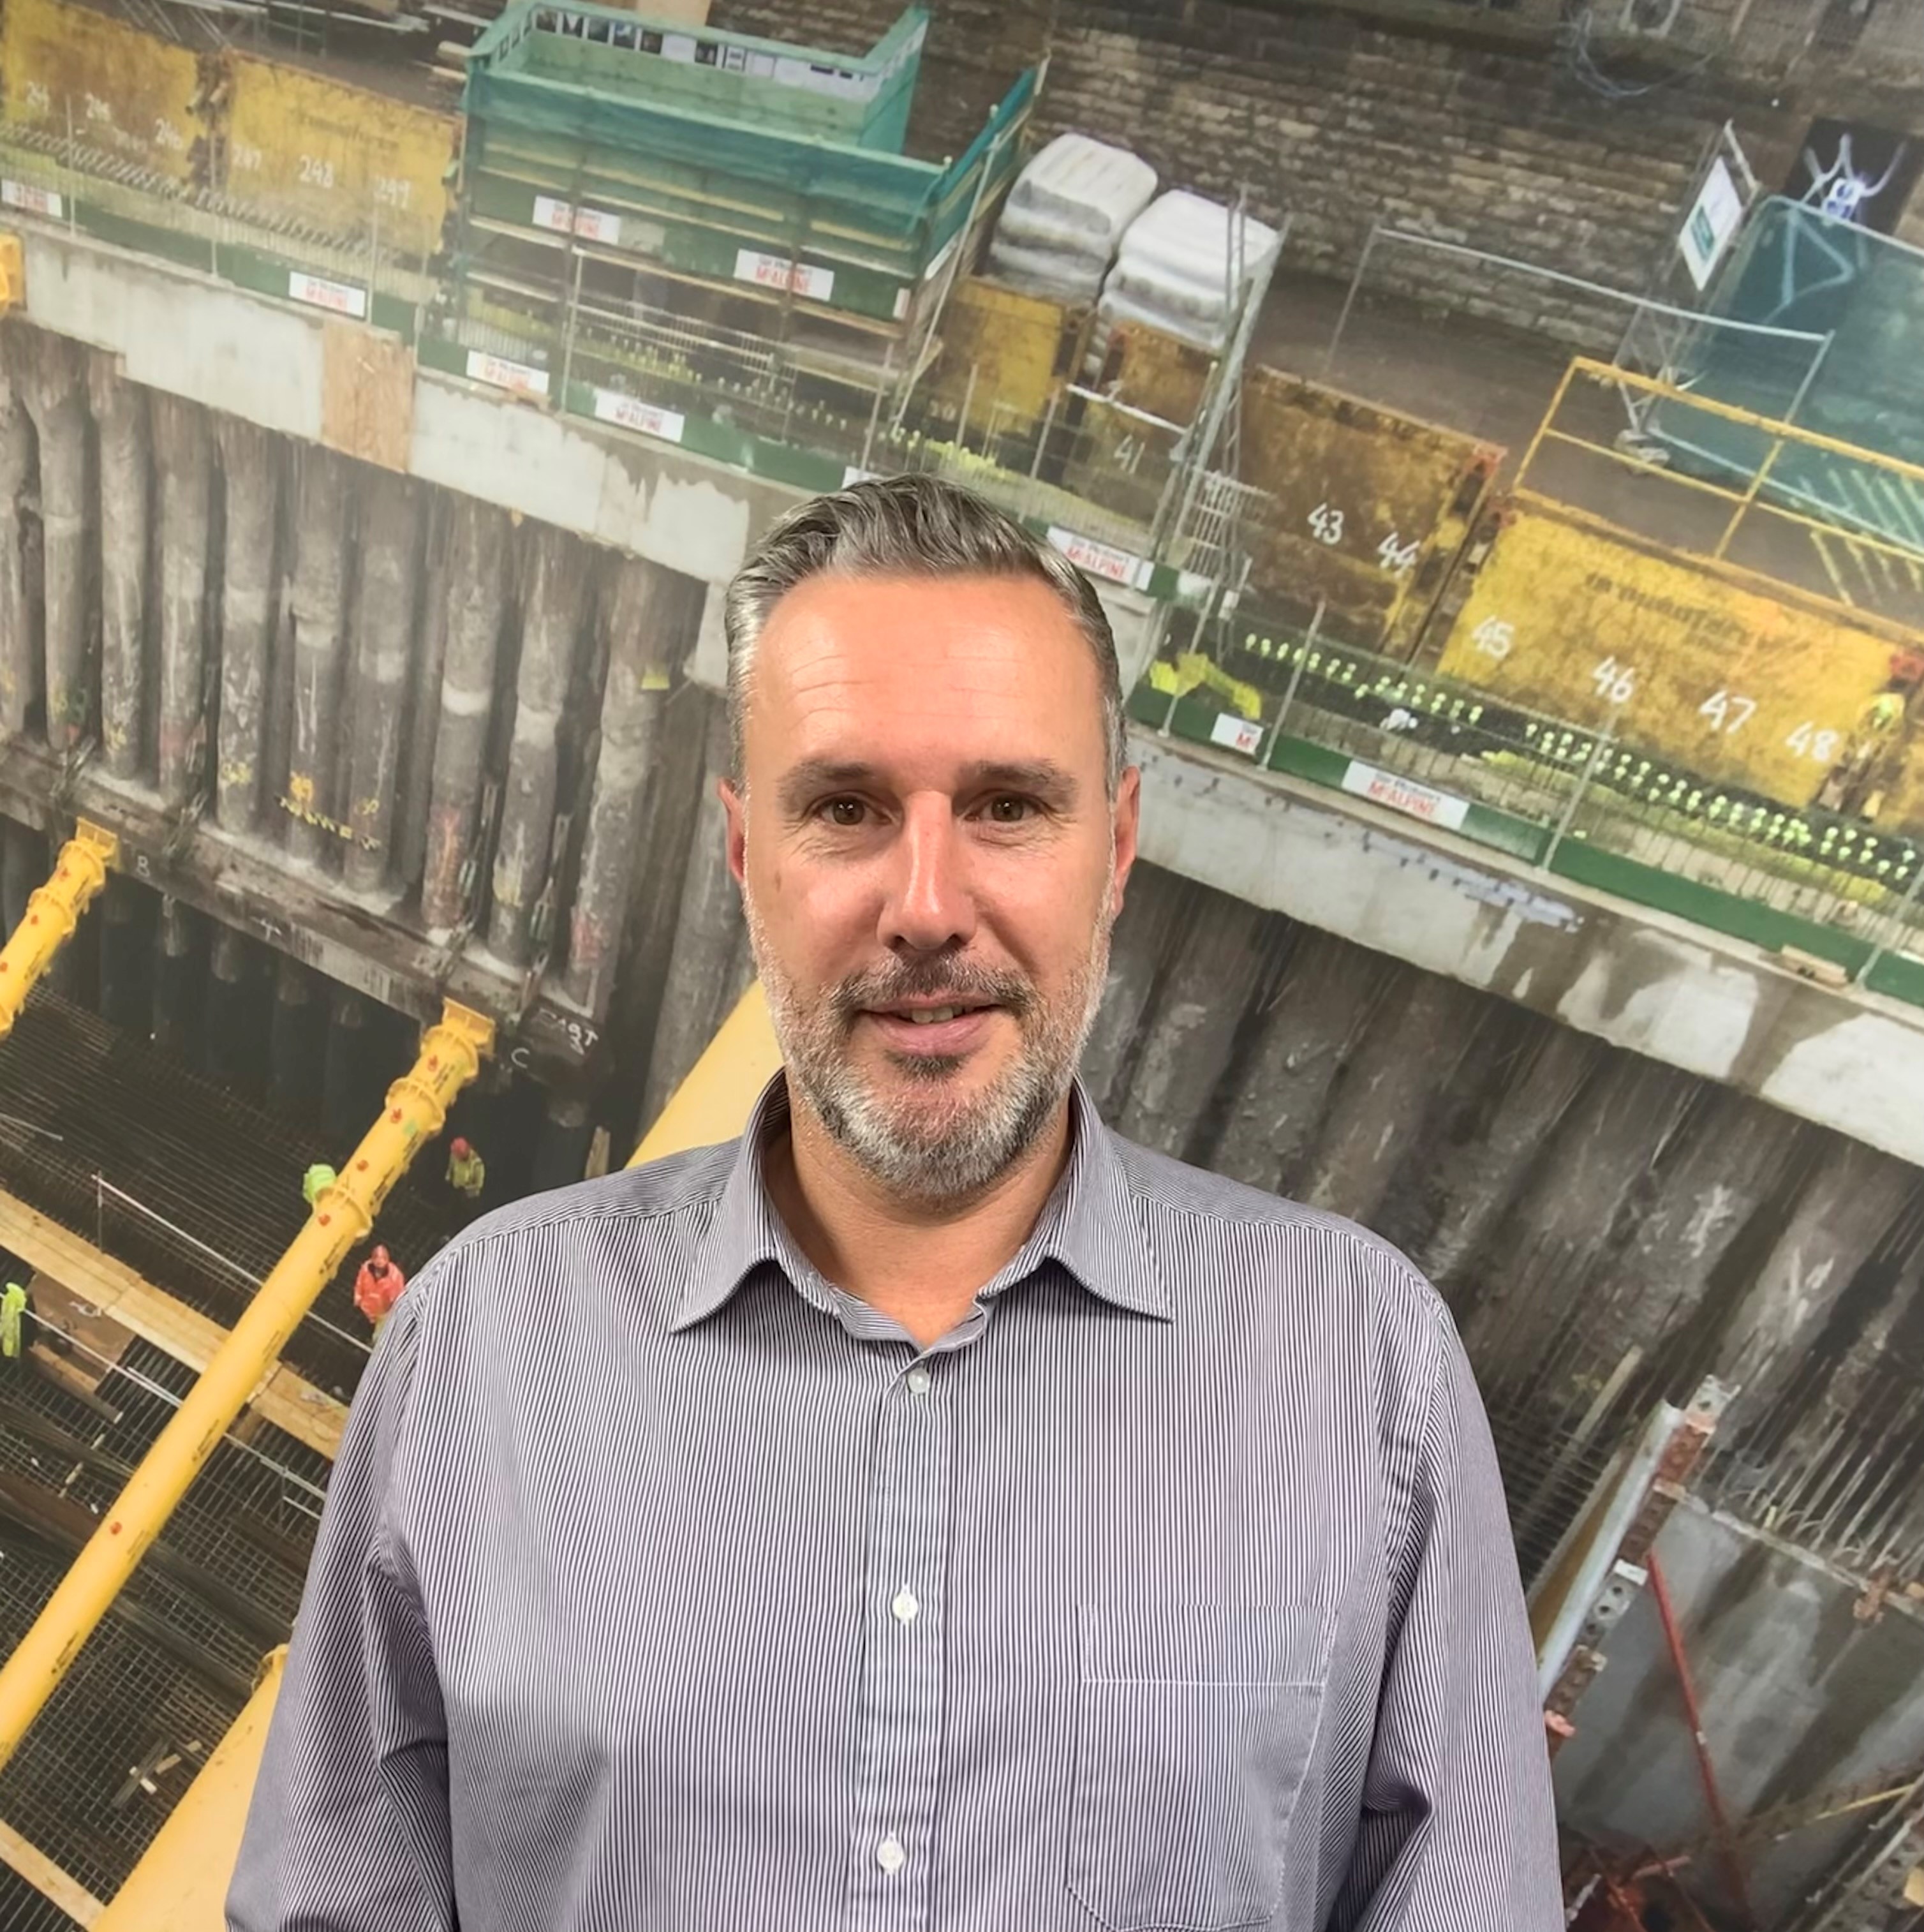 Groundforce appoints new area sales manager for Scotland